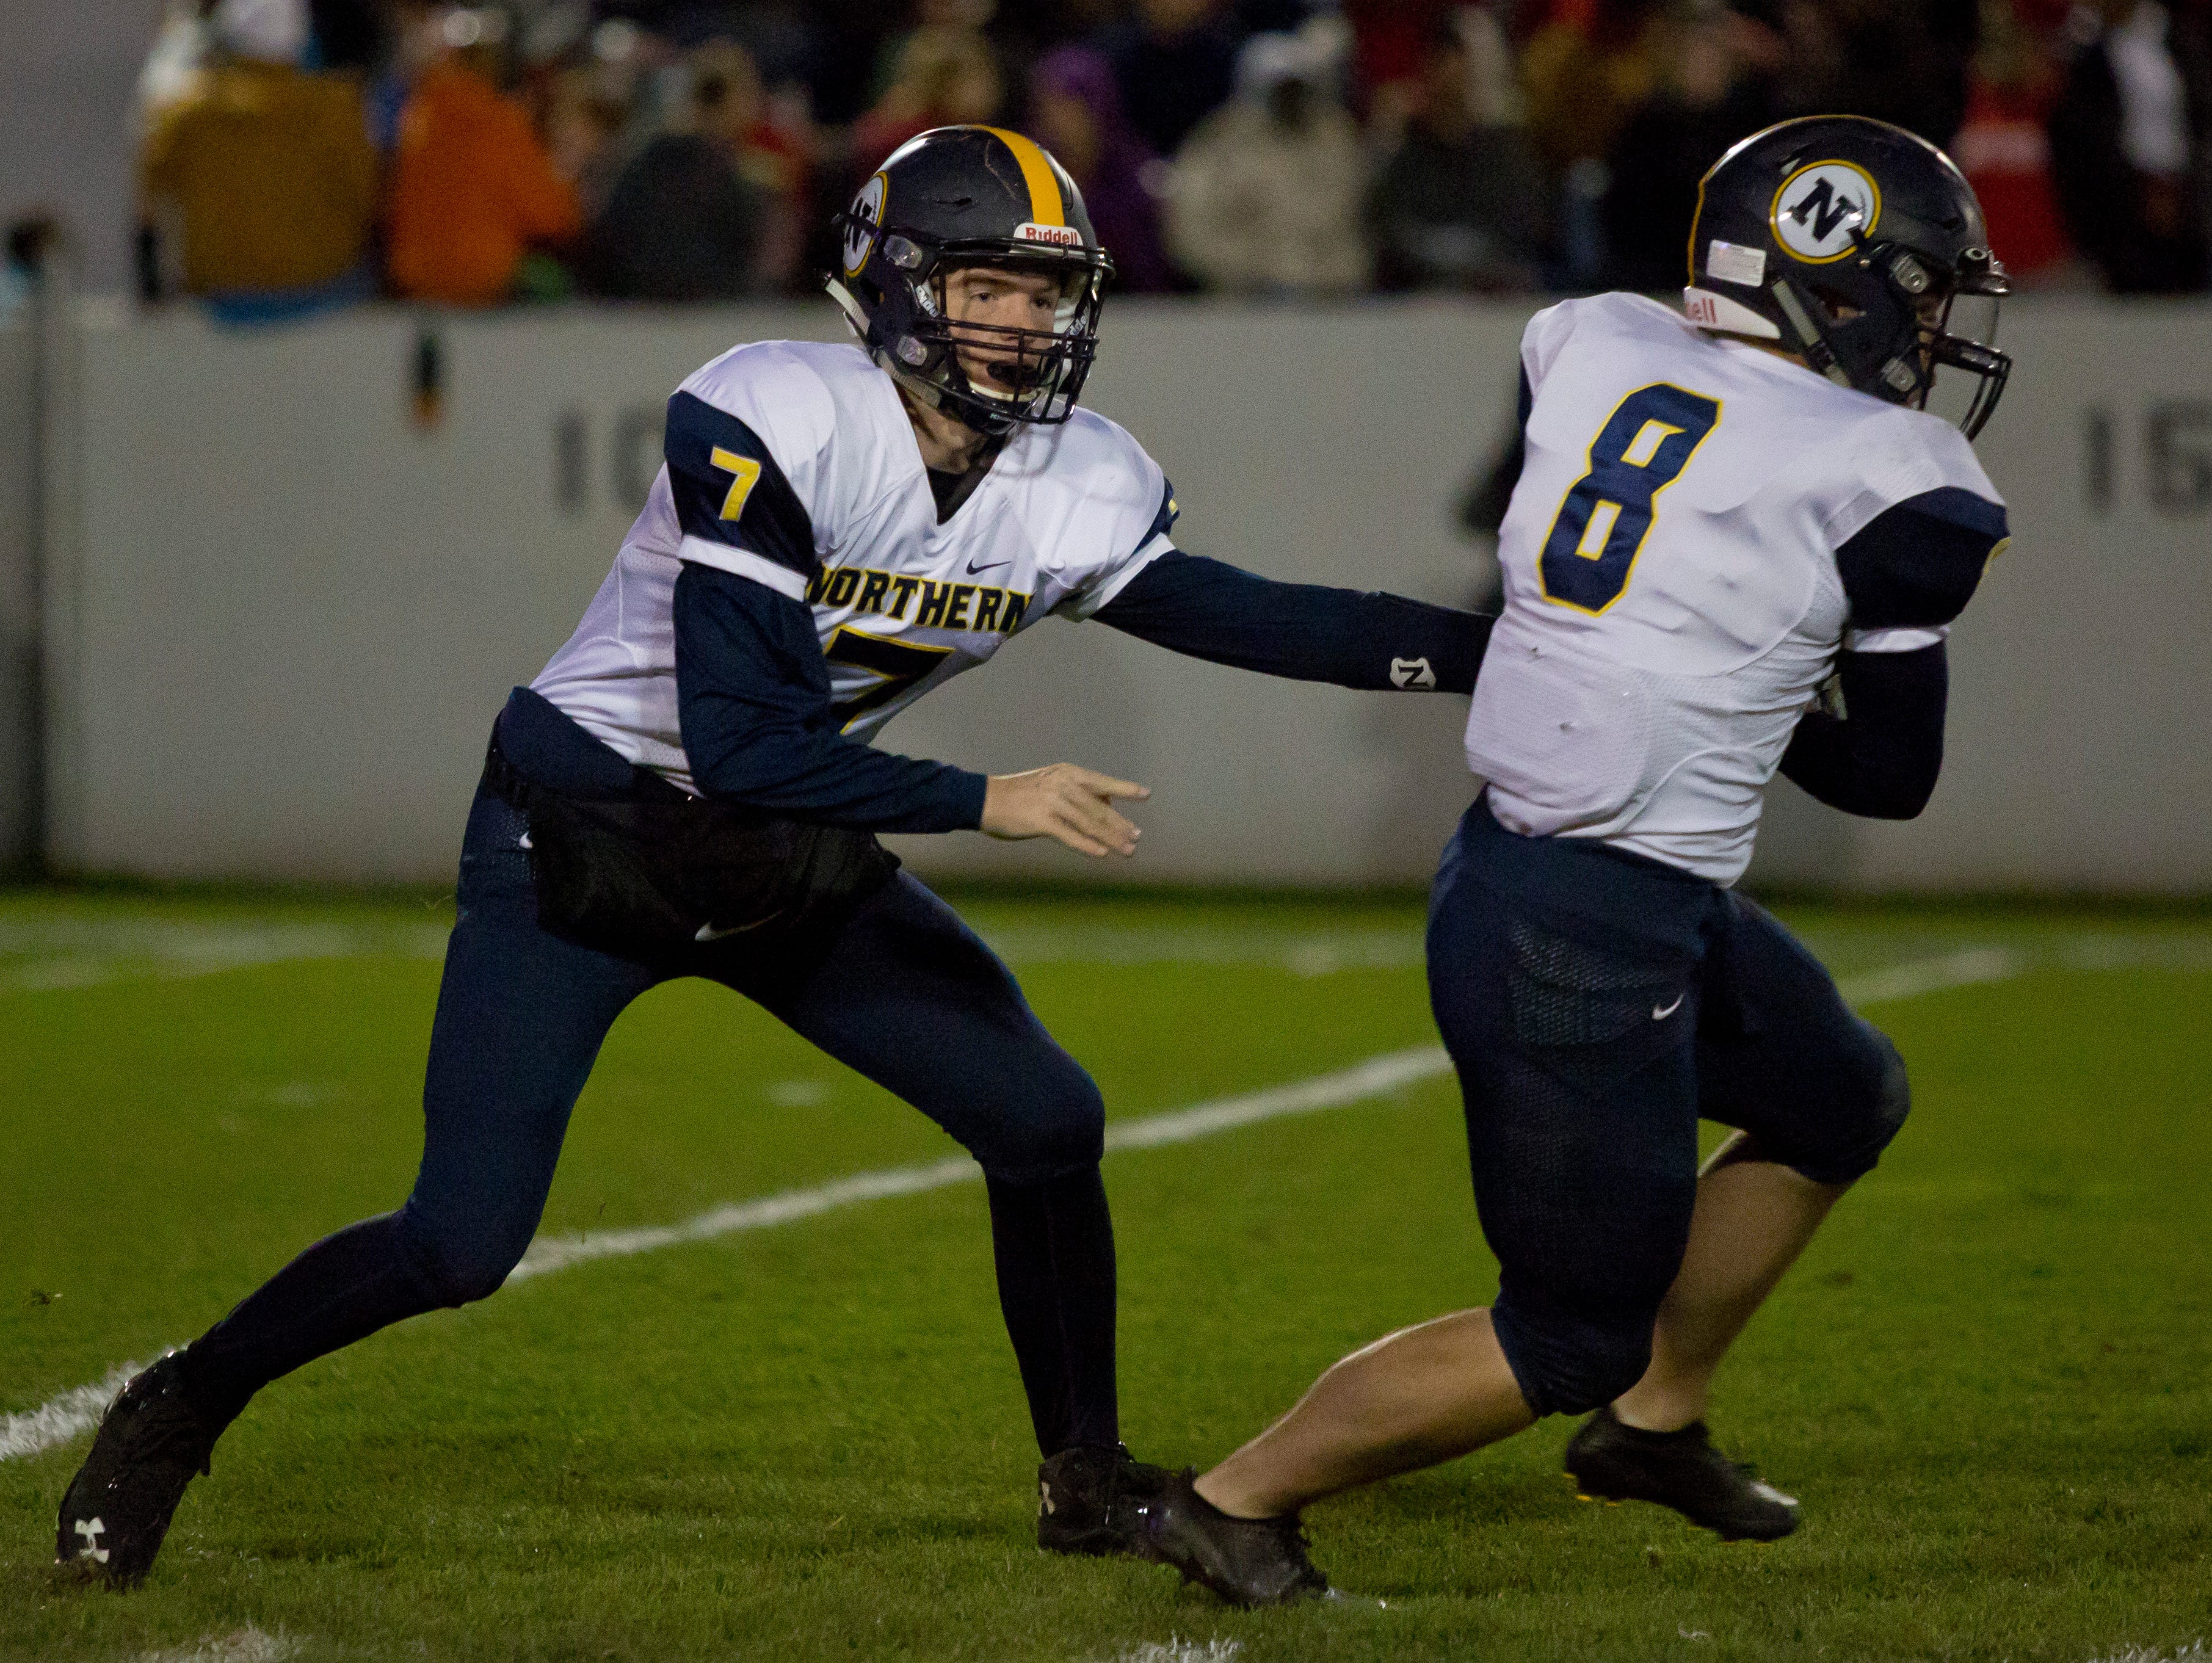 Port Huron Northern junior Billy Fealko hands off the ball to junior Travis Hughes during the Crosstown Showdown Friday, October 23, 2015 at Memorial Stadium in Port Huron.